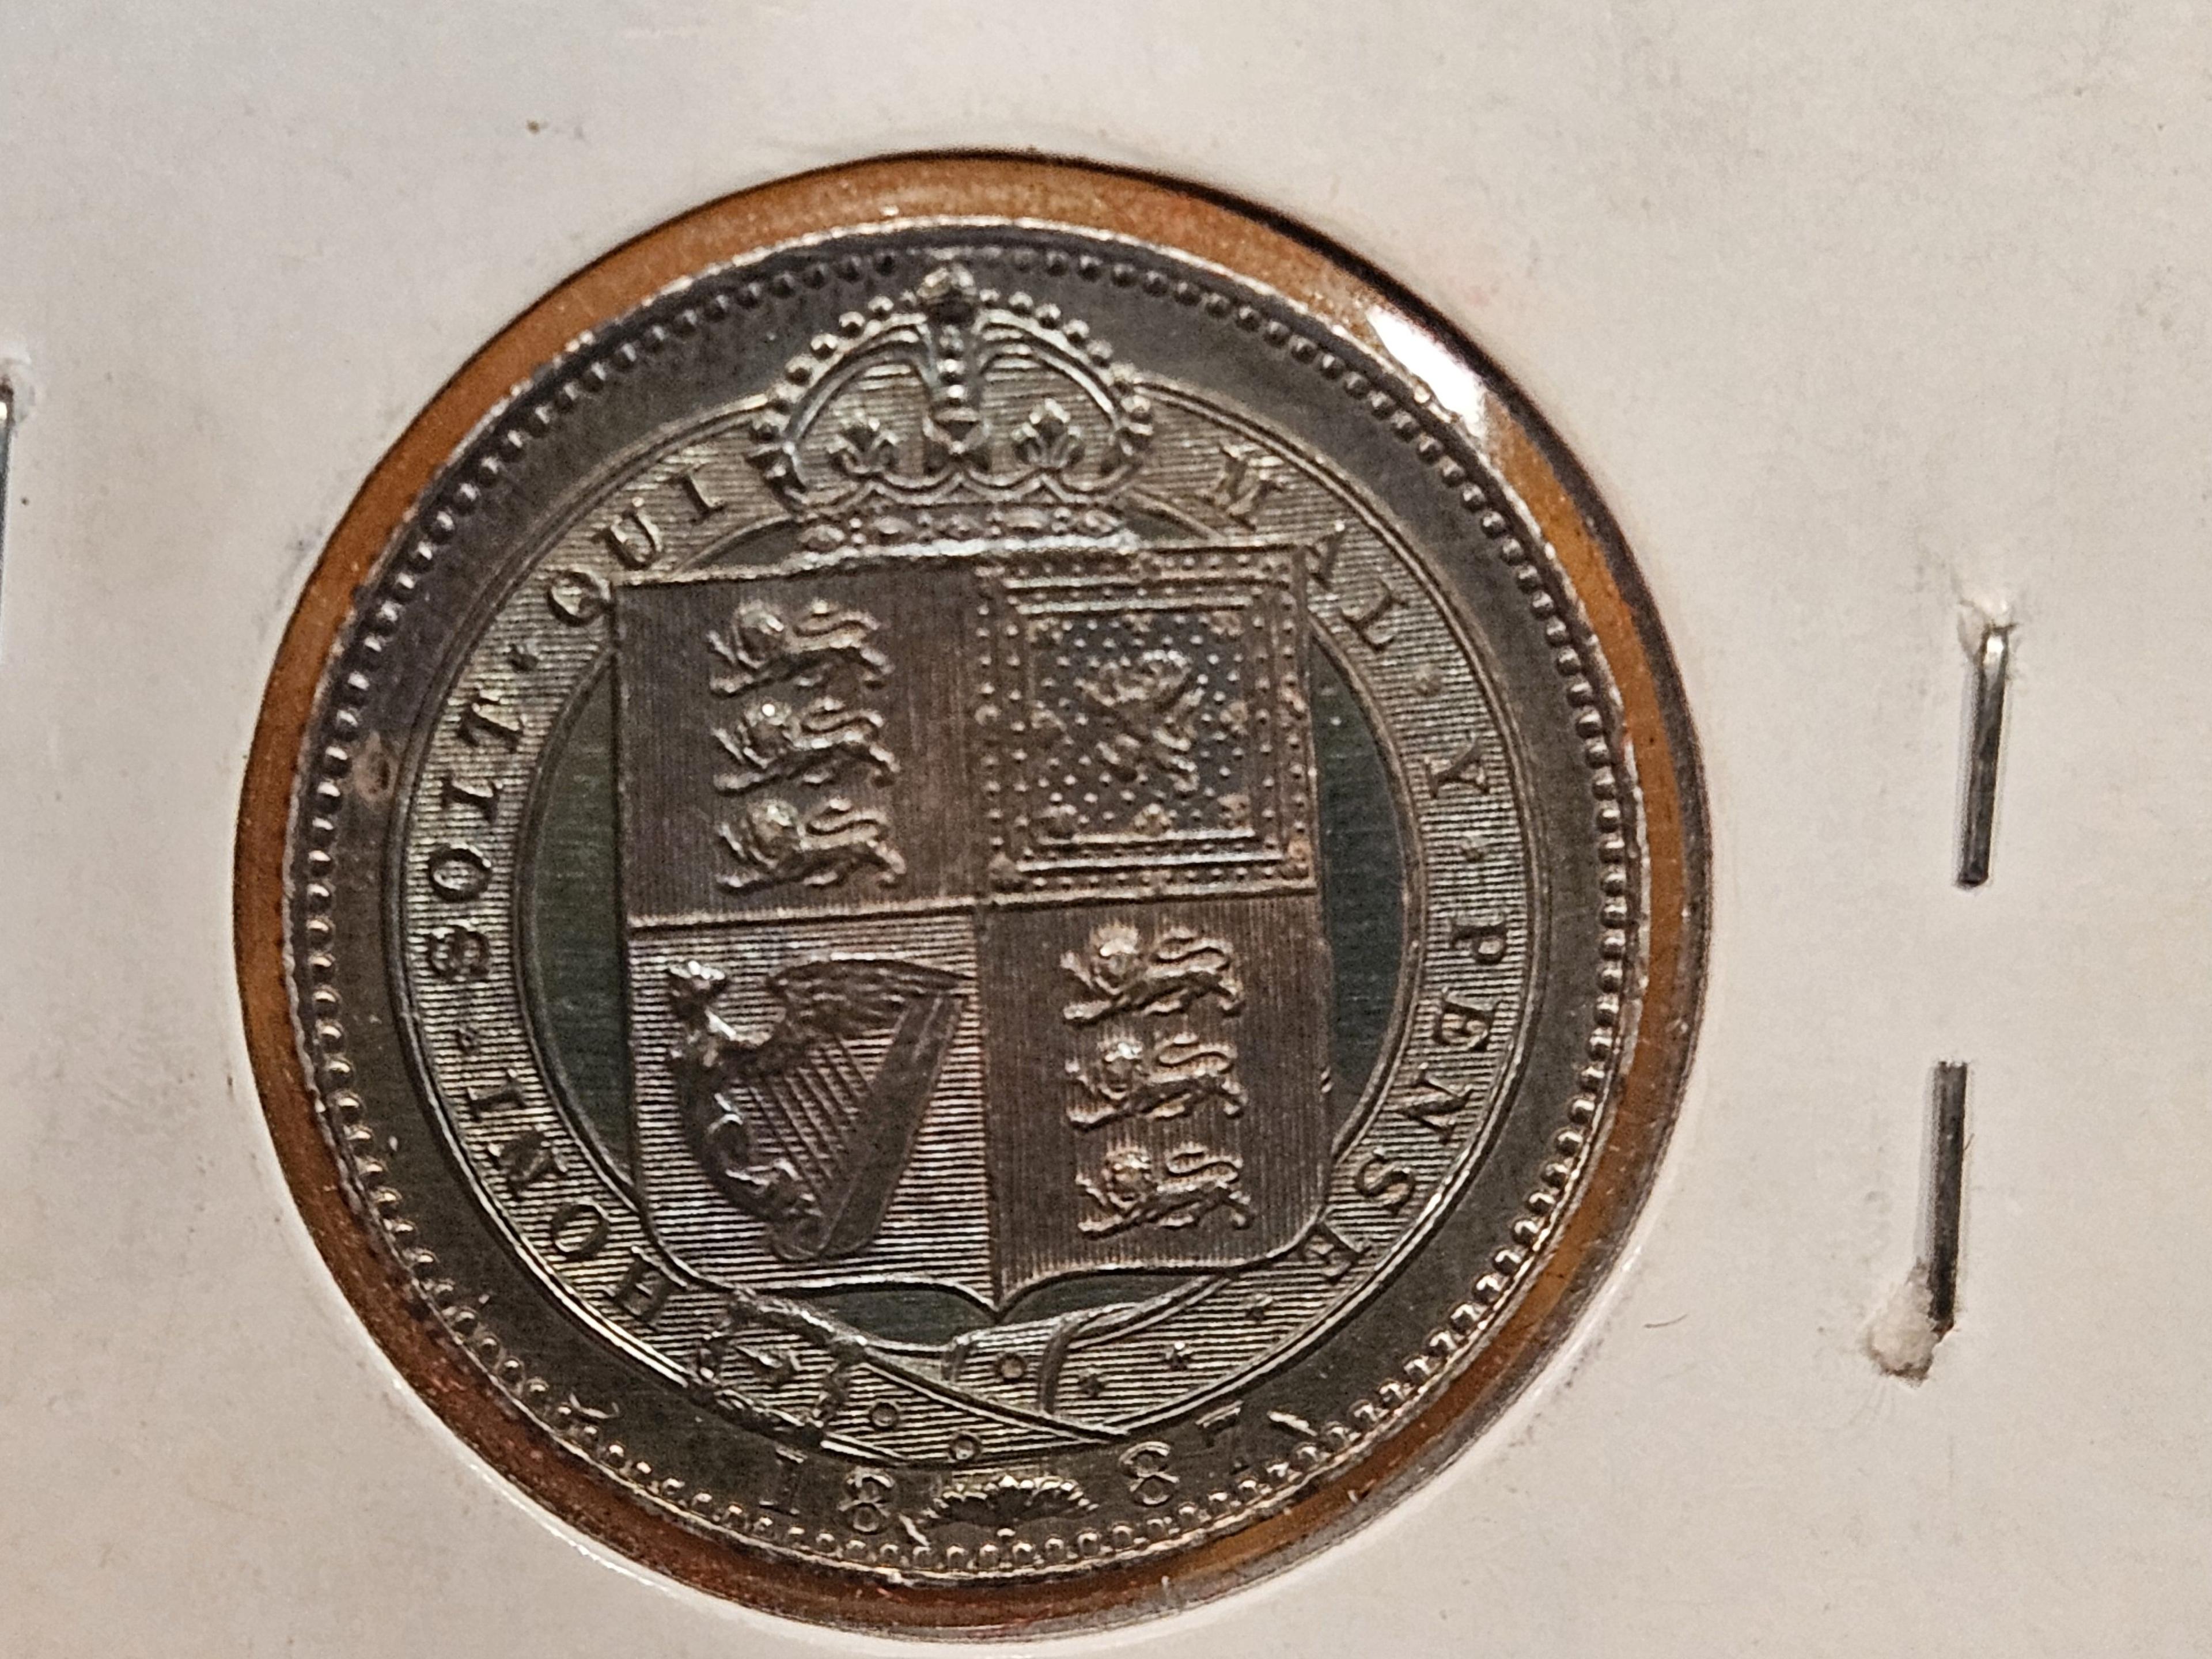 PROOF! 1887 Great Britain Proof one shilling